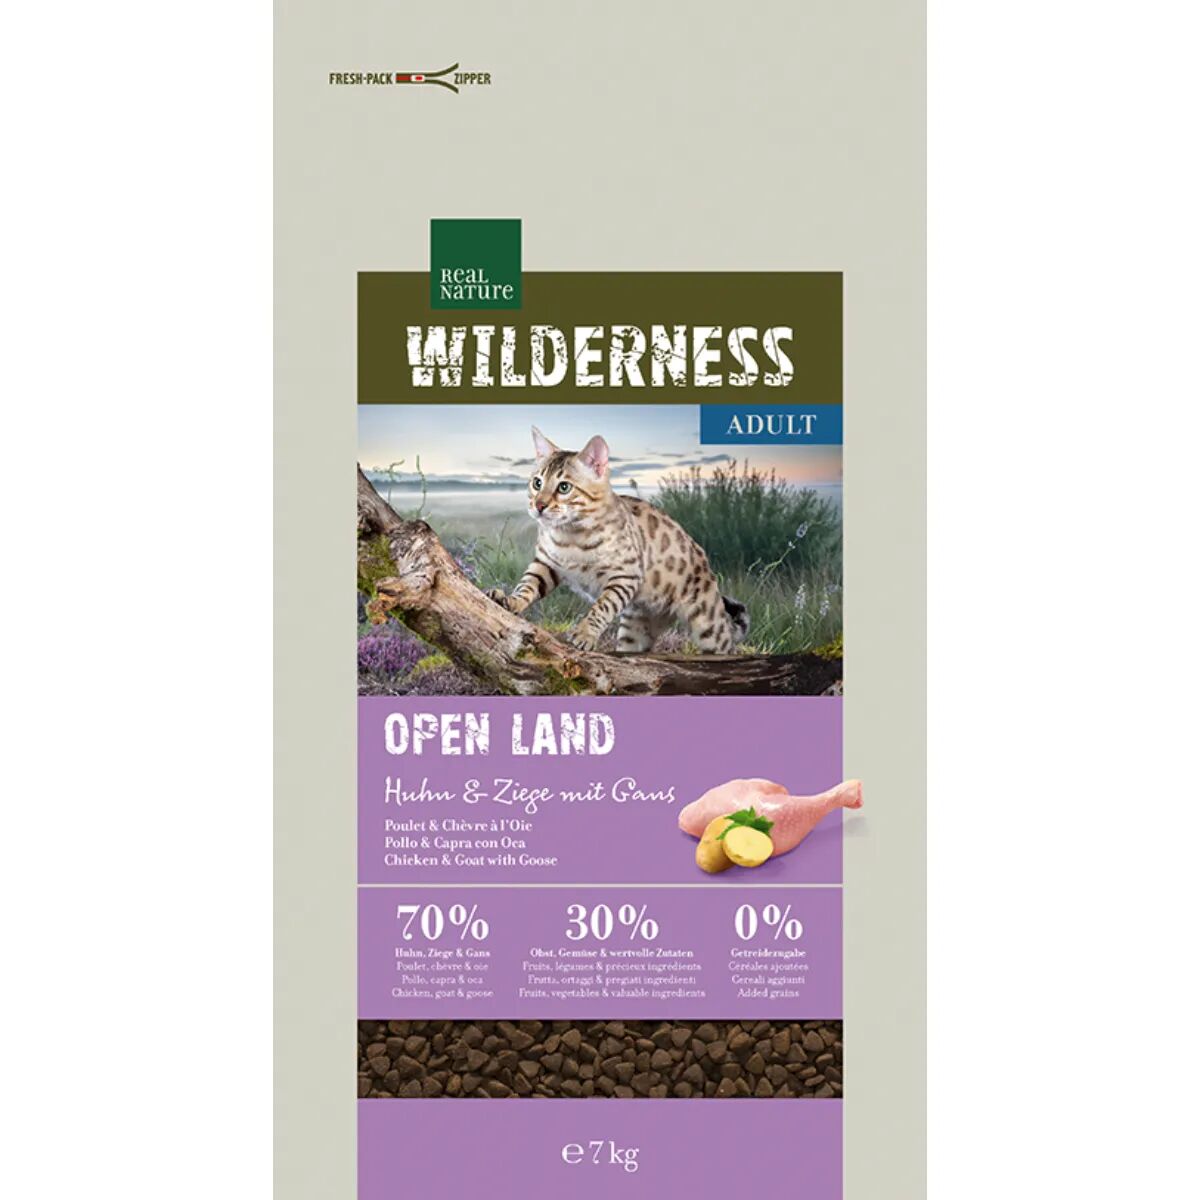 REAL NATURE Wilderness Open Land Adult 7KG